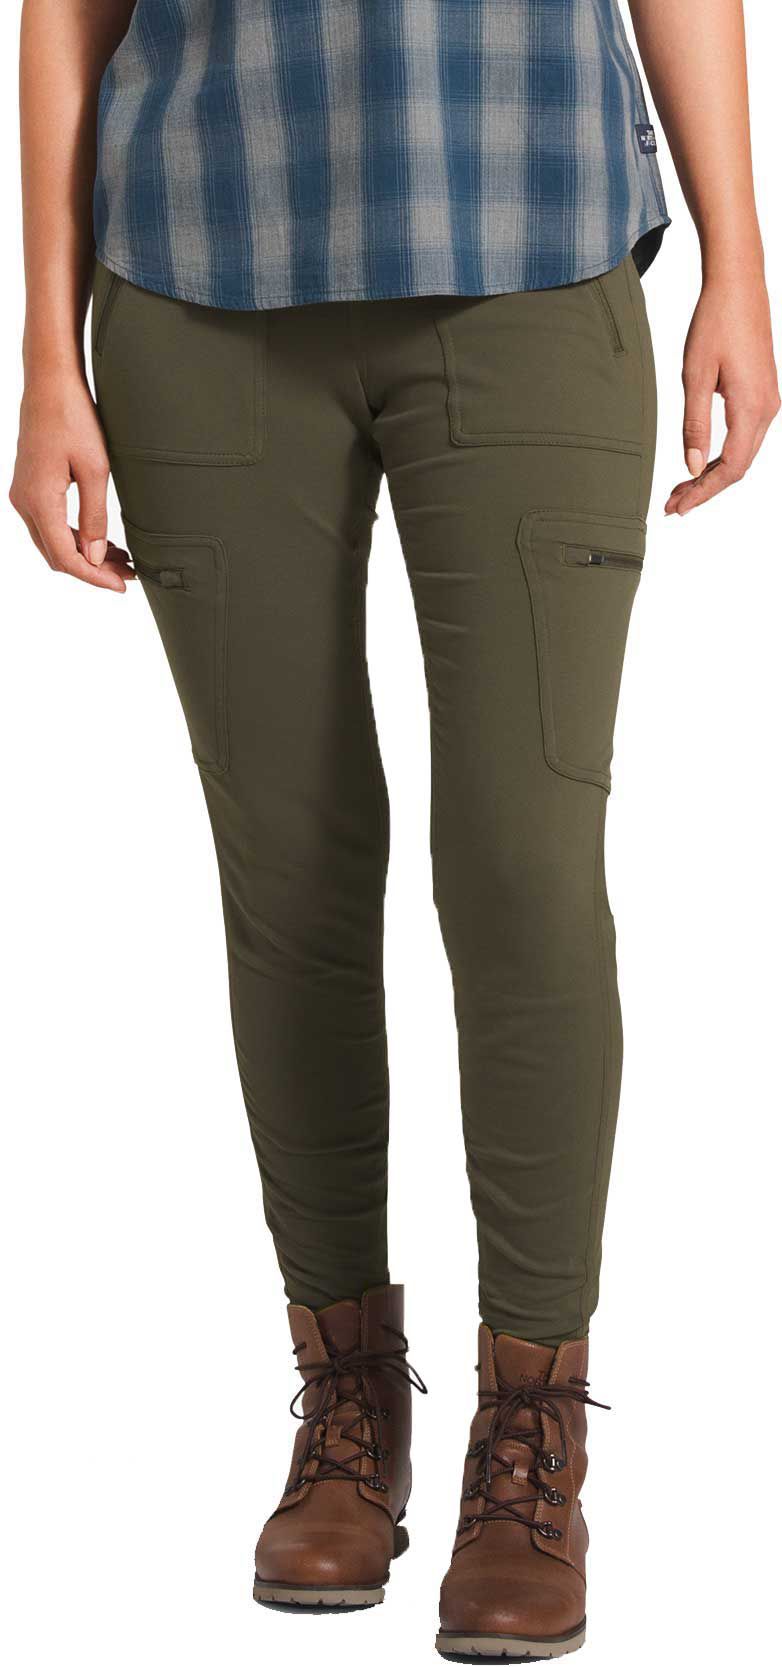 north face women's hybrid hiker tights